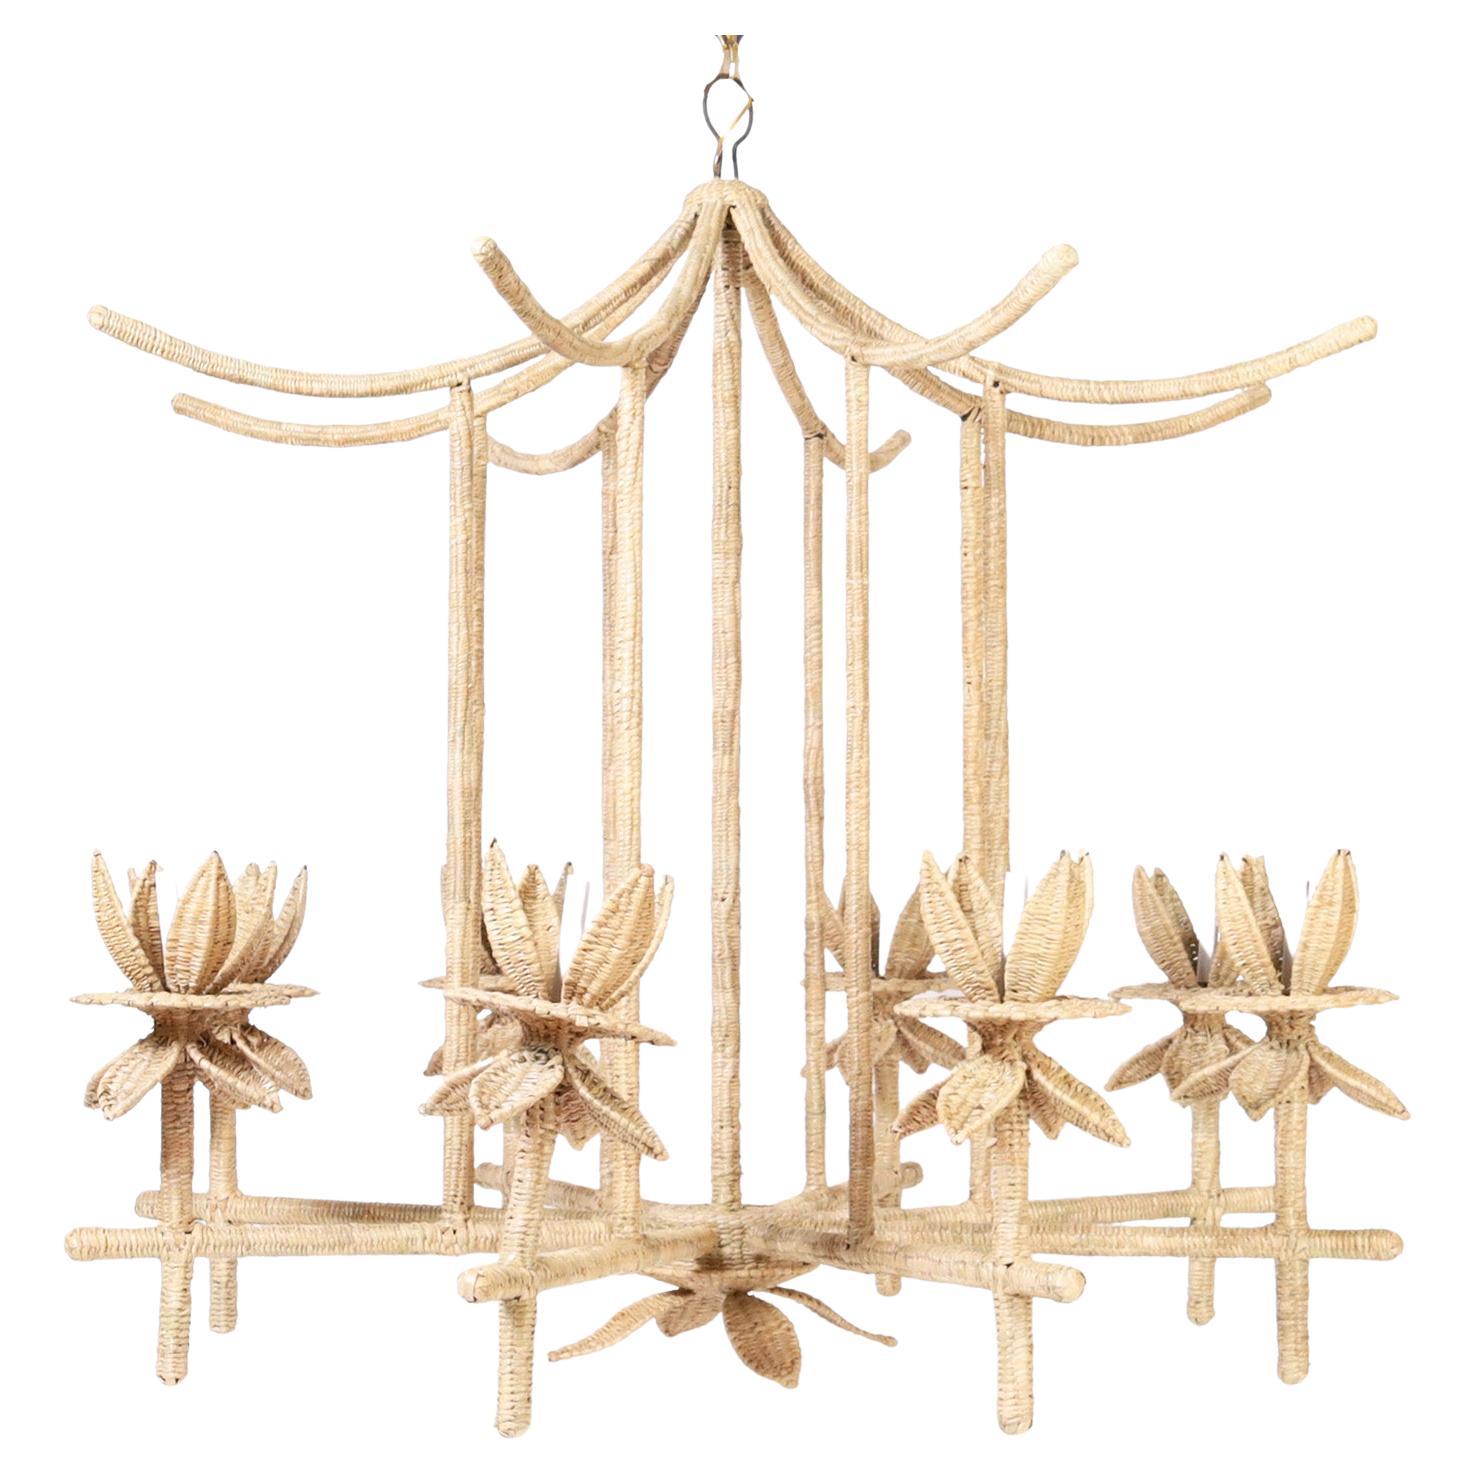 Seychelles Woven Reed Pagoda Form Chandelier from the FS Flores Collection